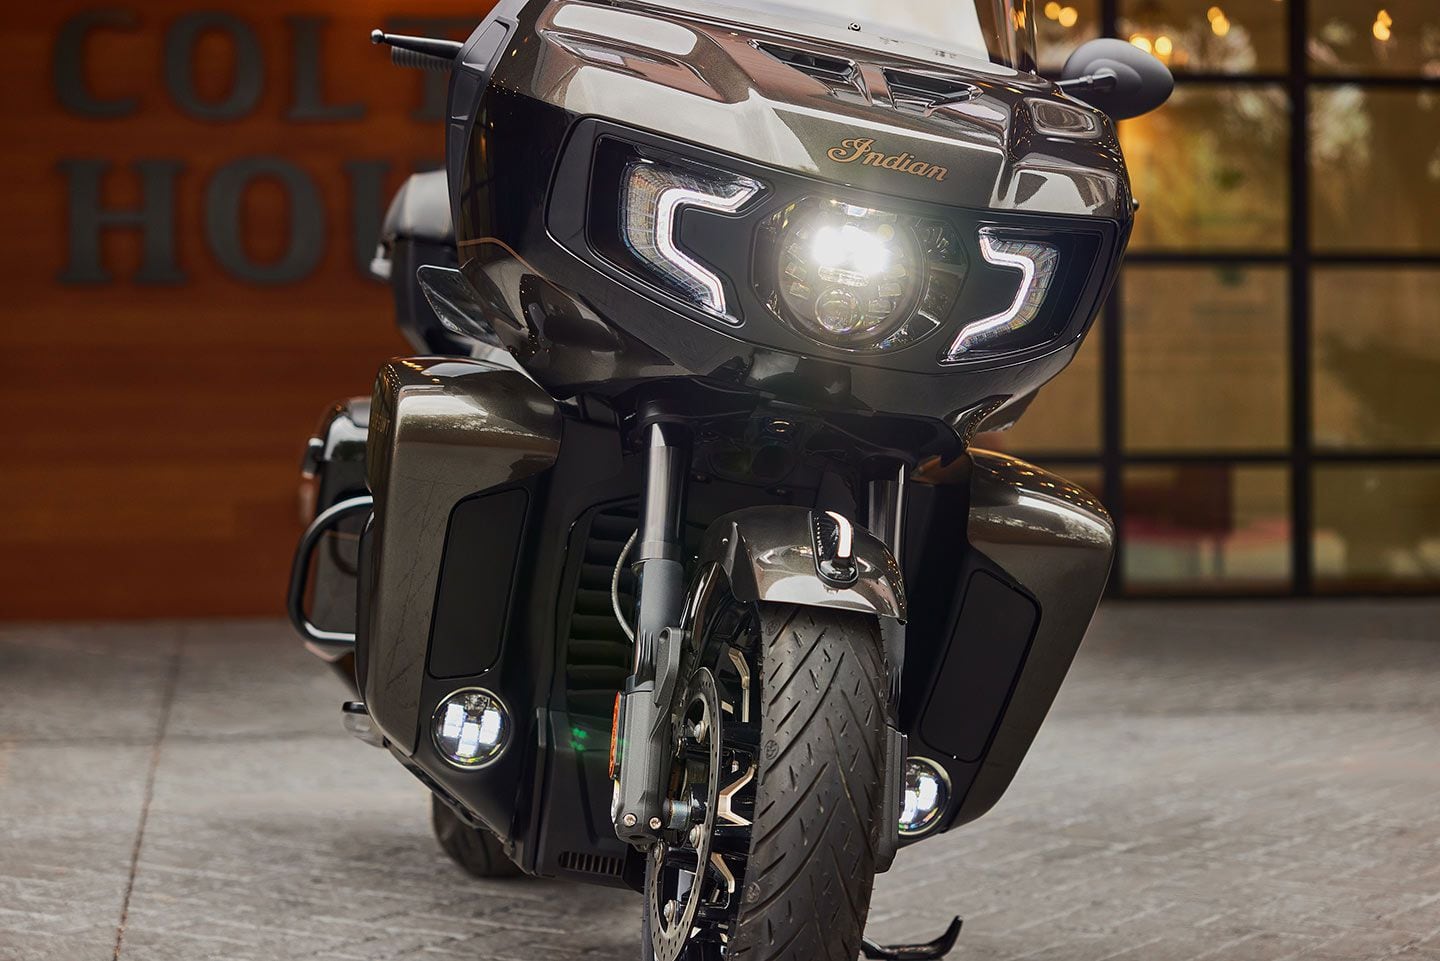 The Pursuit Elite also comes standard with a Pathfinder Adaptive LED headlight and Pathfinder S LED driving lights integrated into the lower fairings.